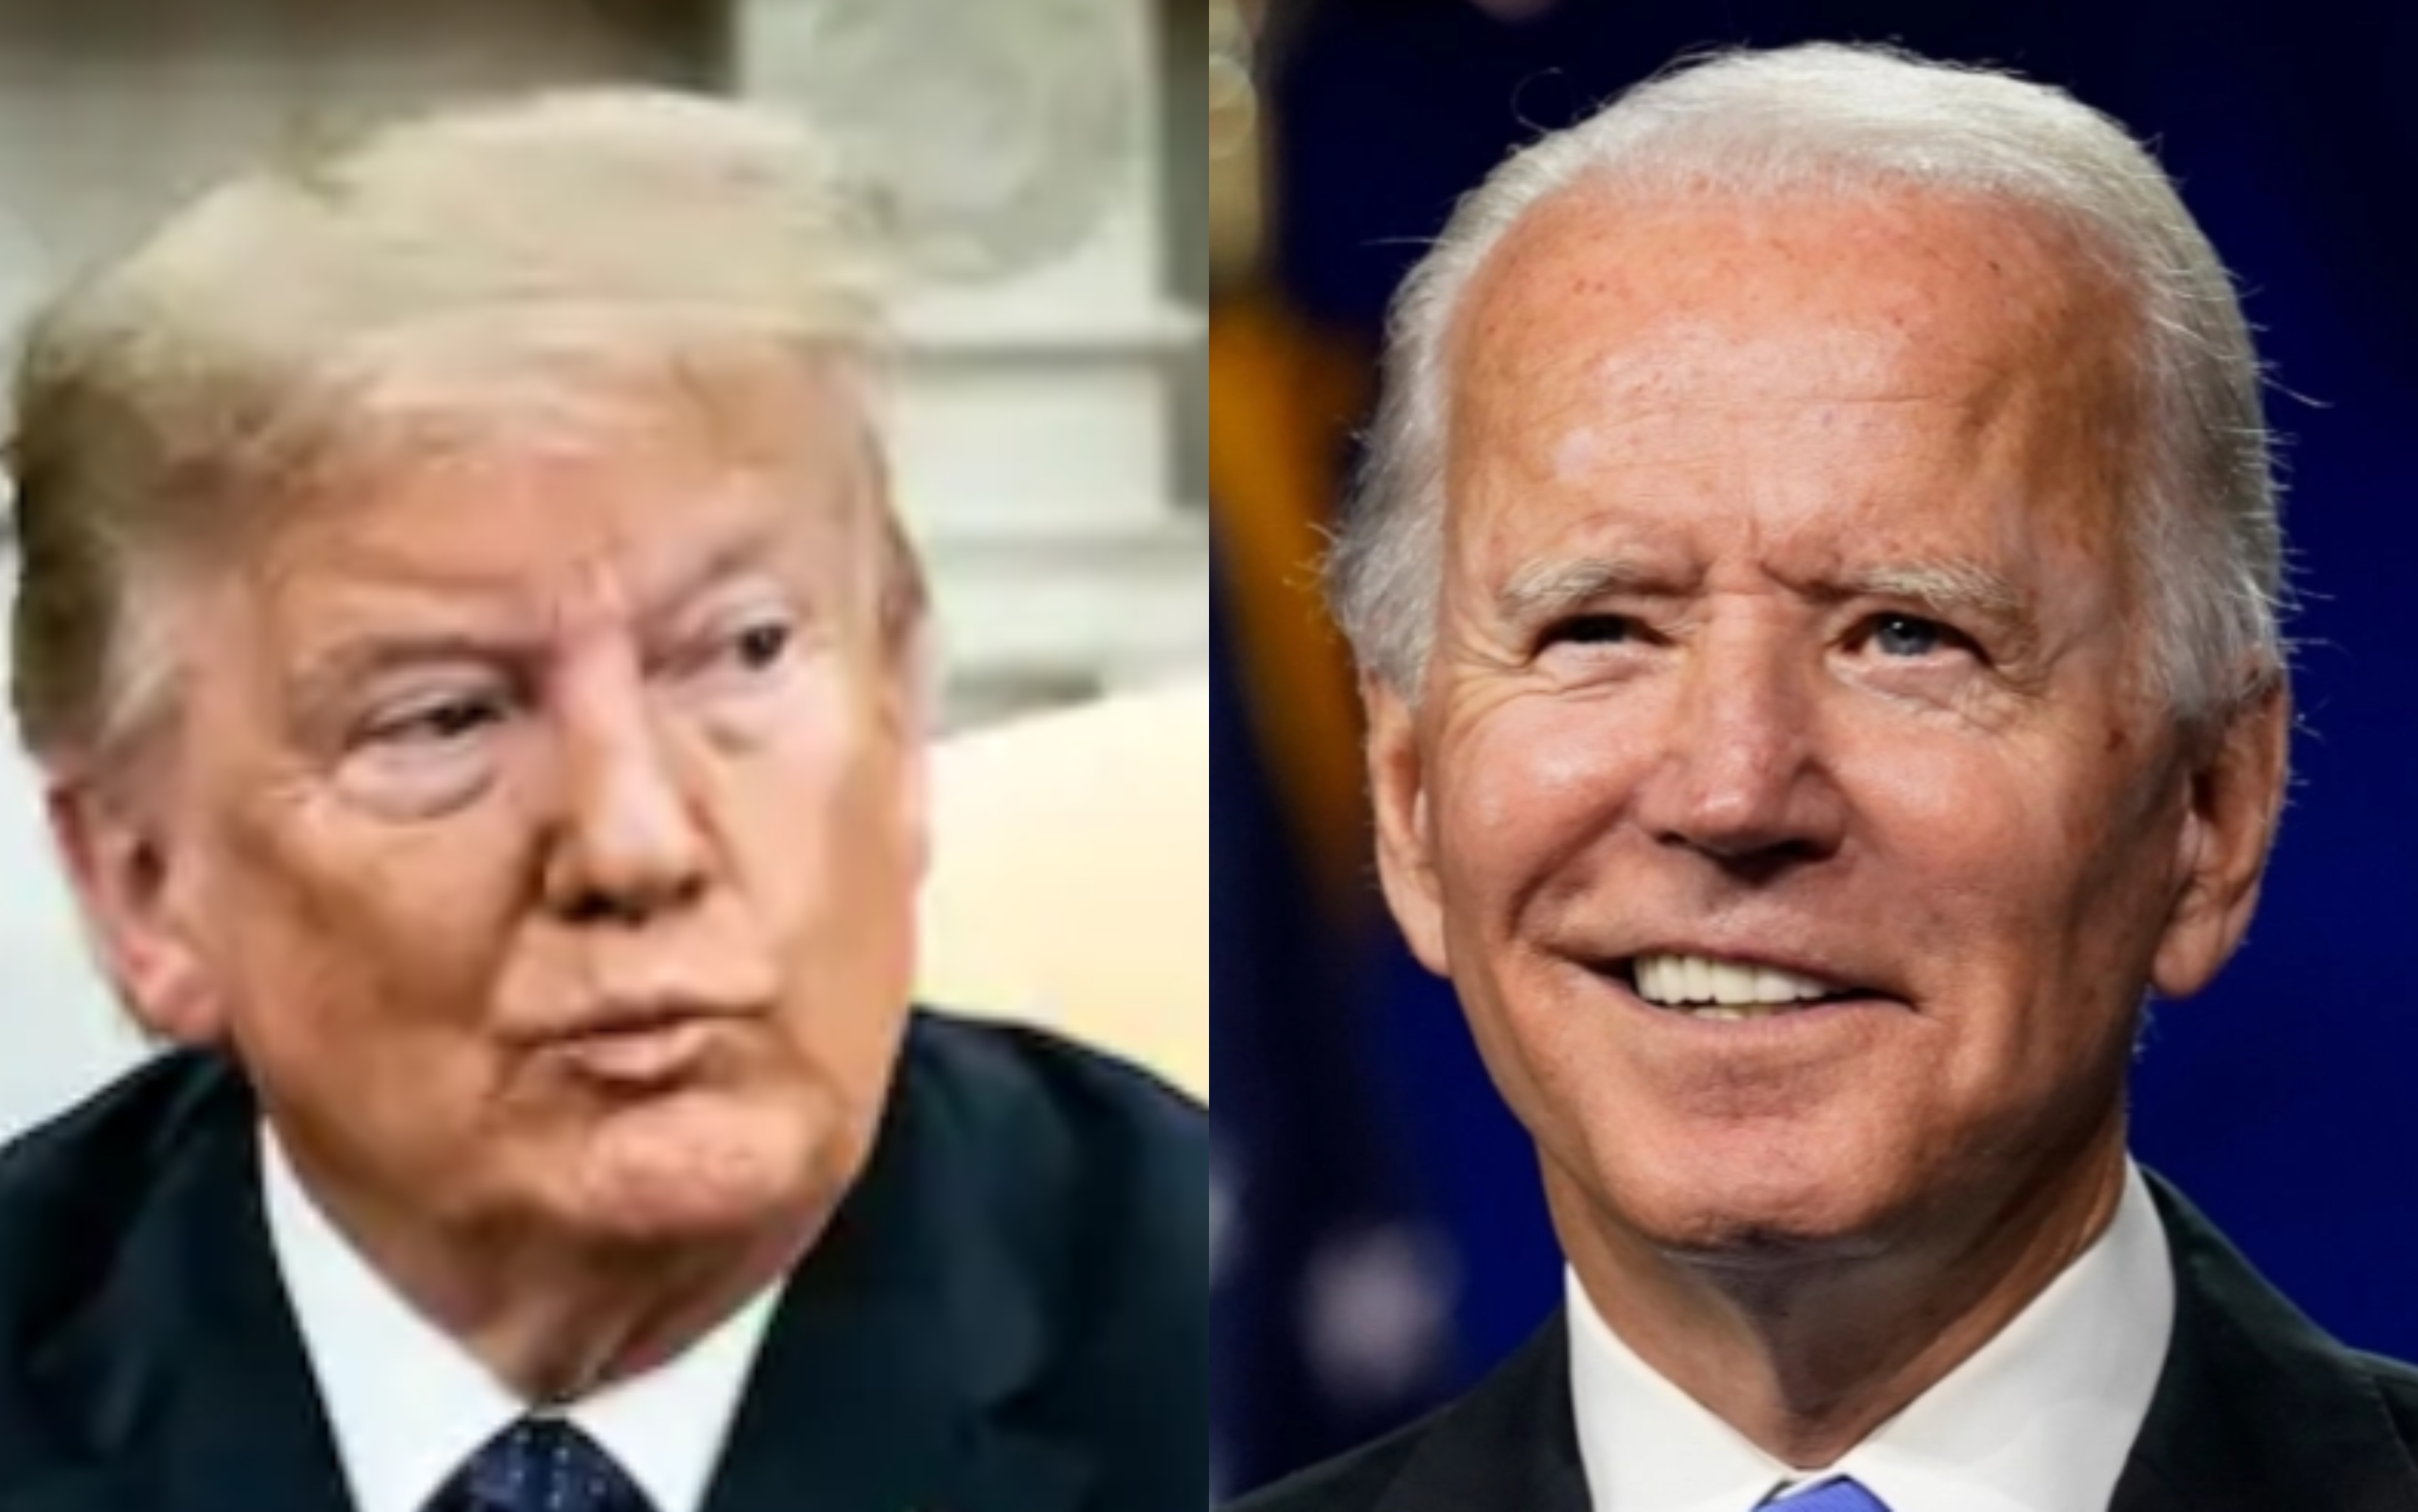 America is back on global stage, says Biden, and Iran could be the first test